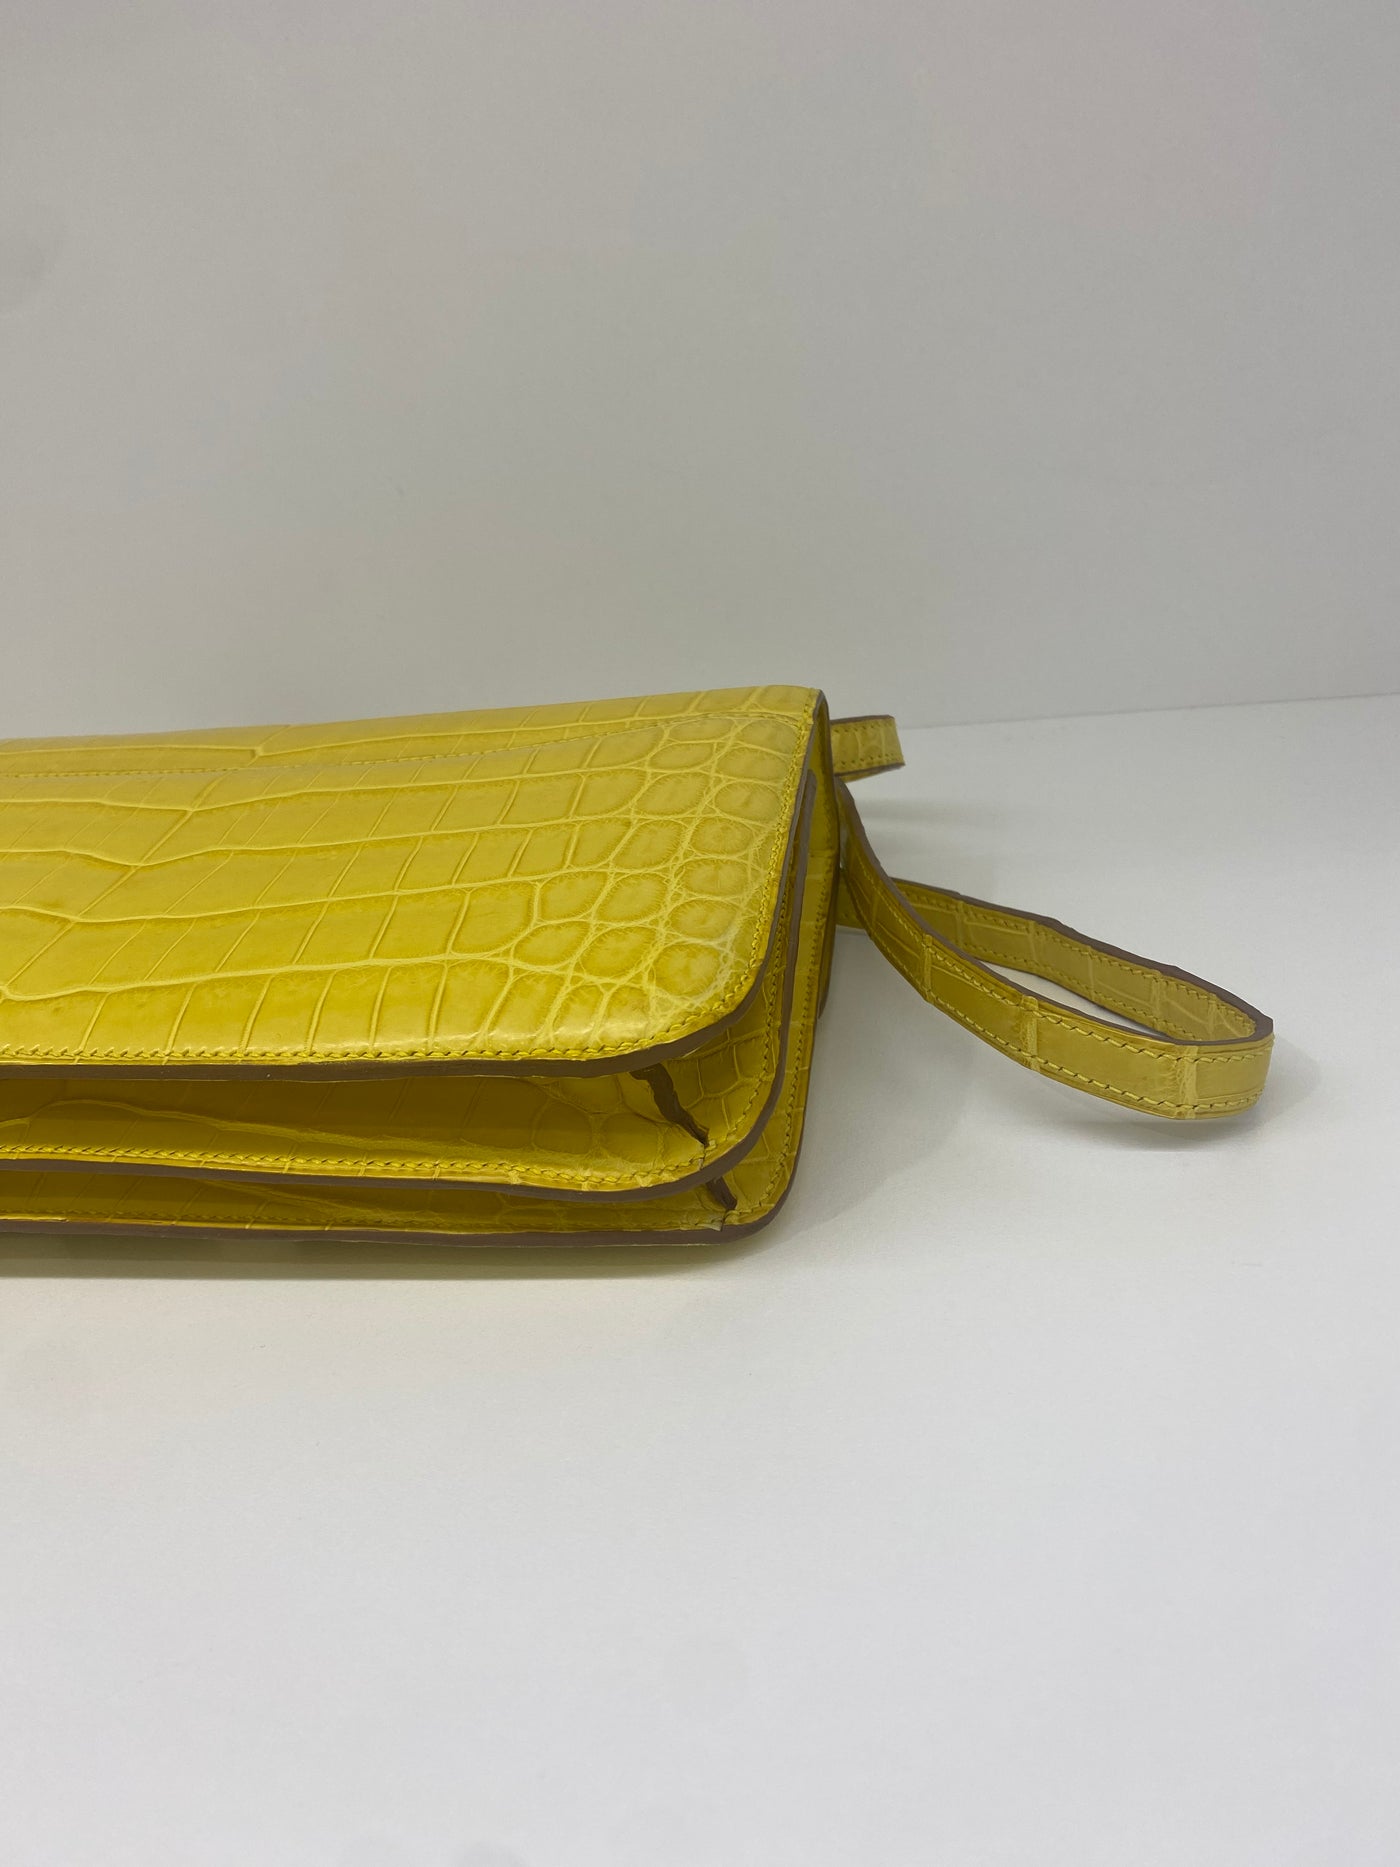 Hermes Constance To Go - Matte Alligator (mimosa) PHW 2018